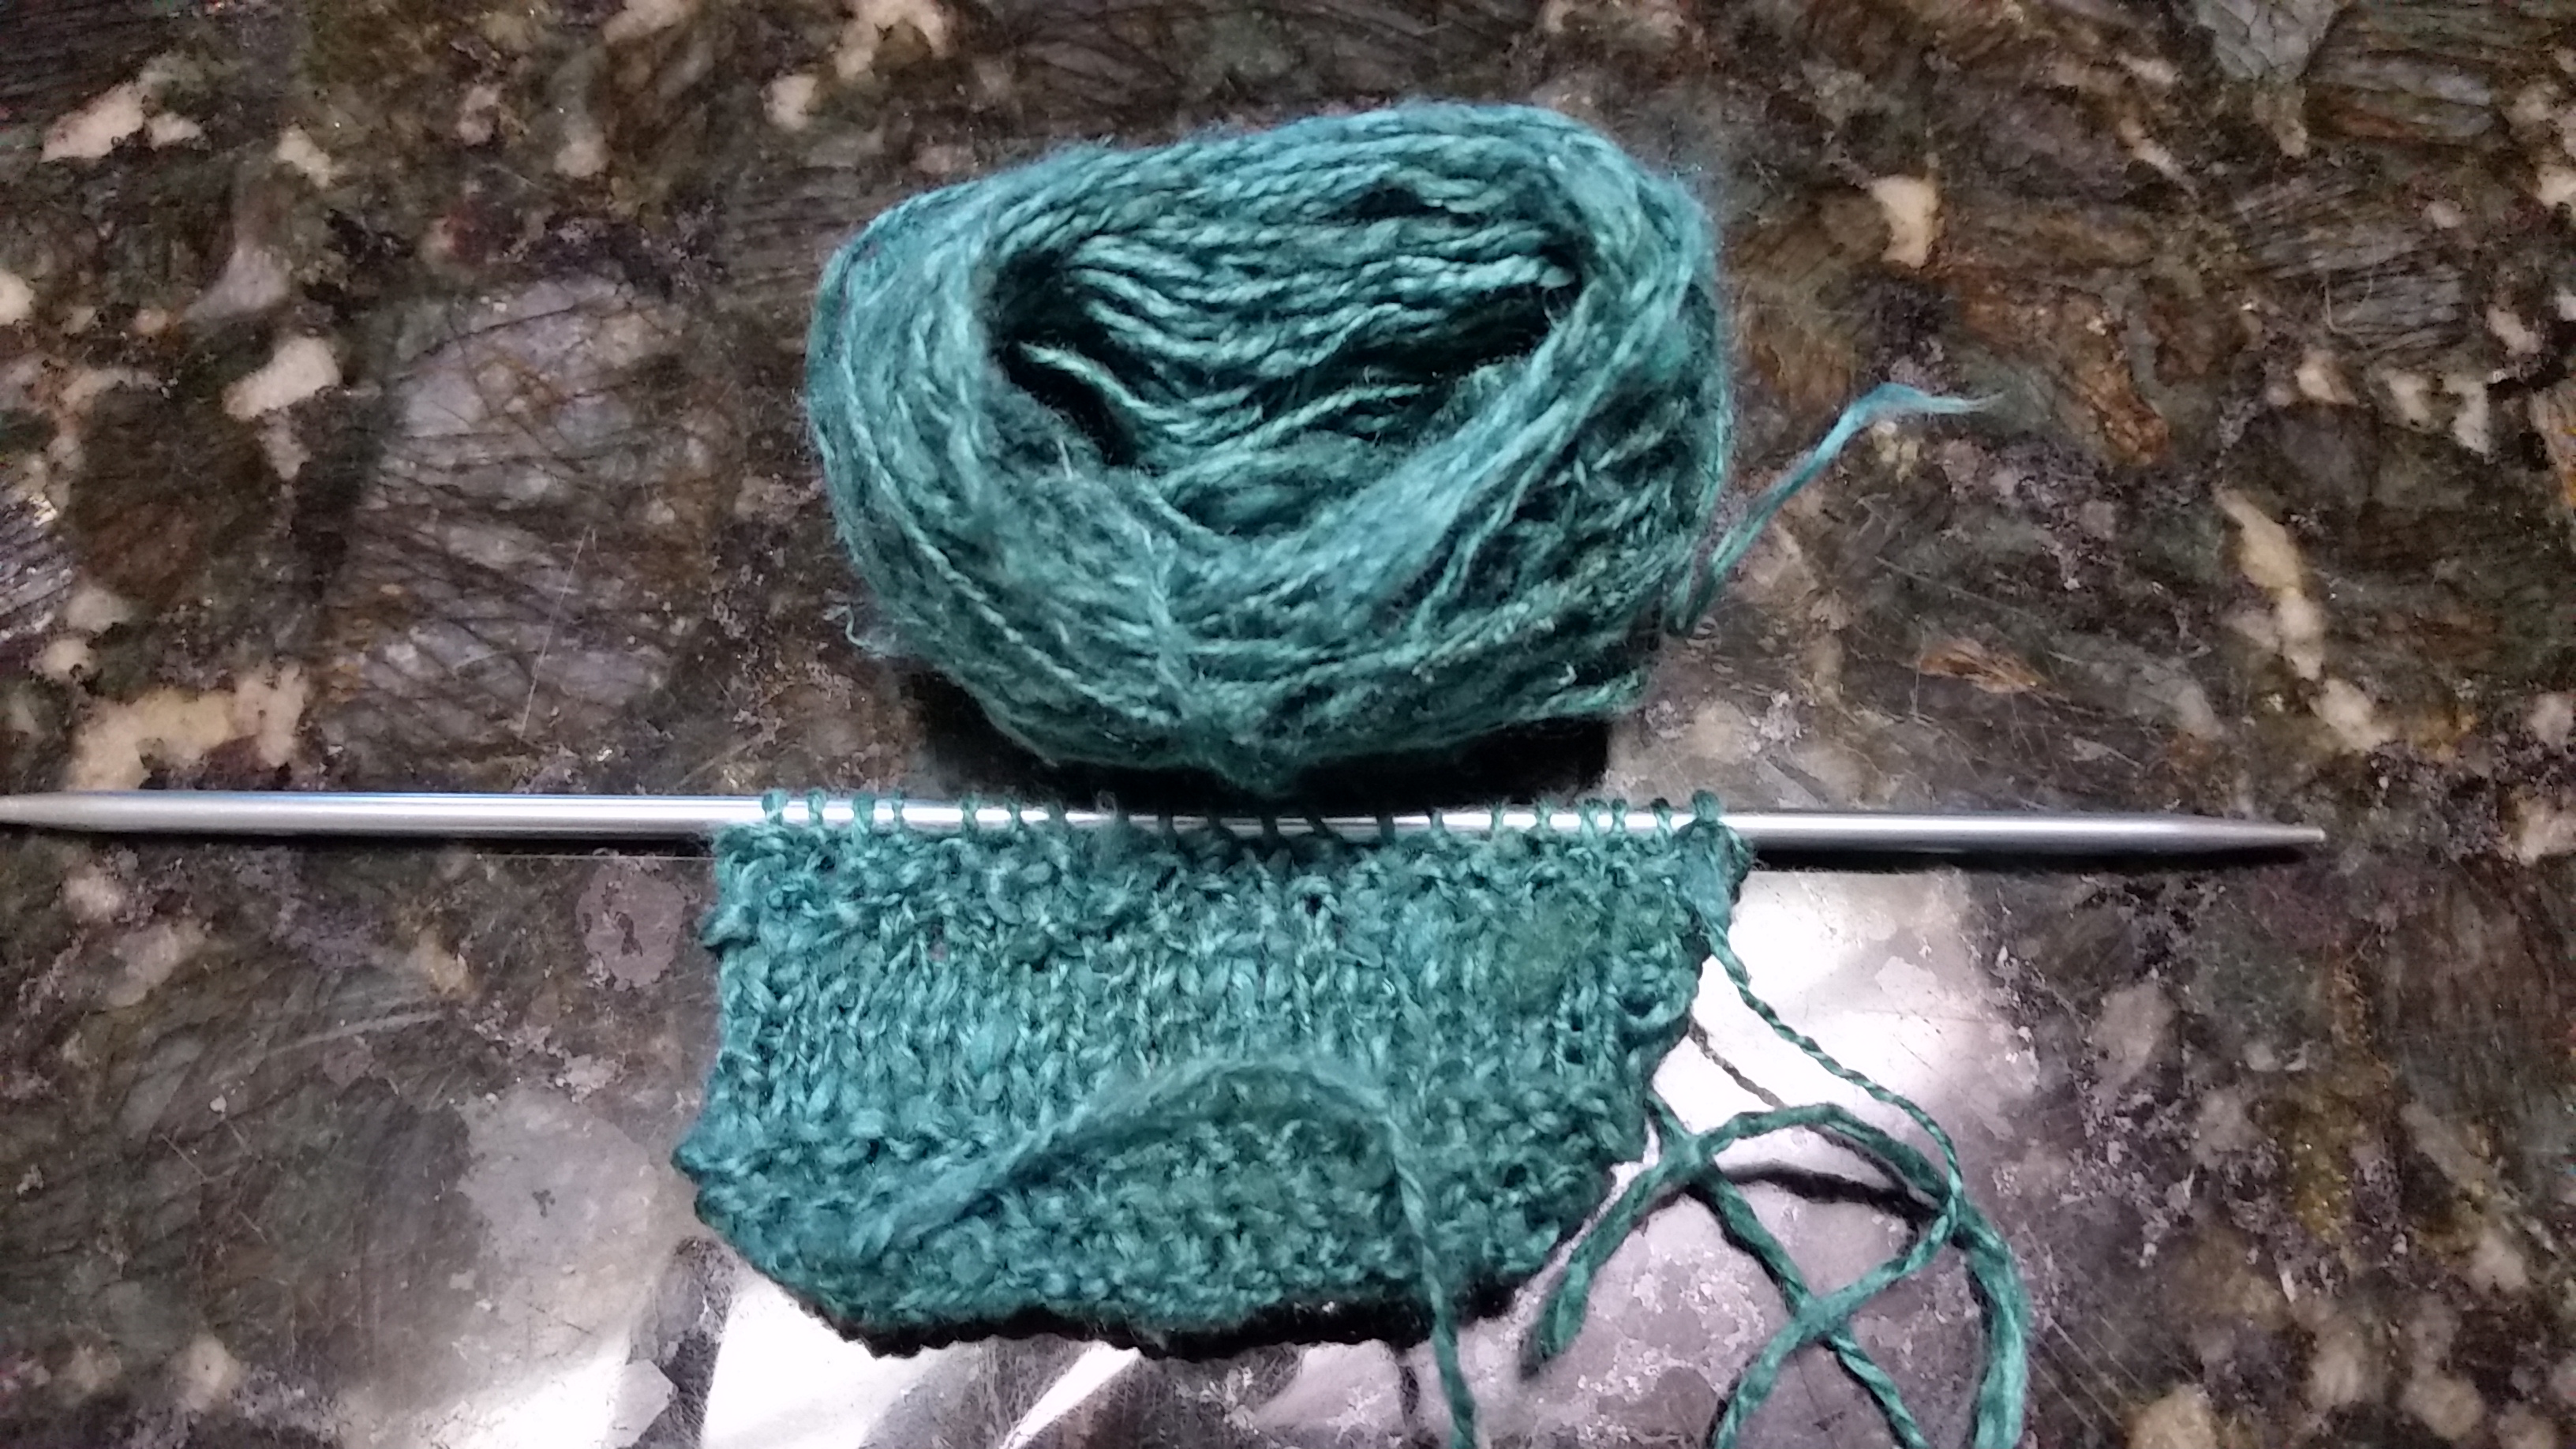 The Silk Lap, spun and knitted